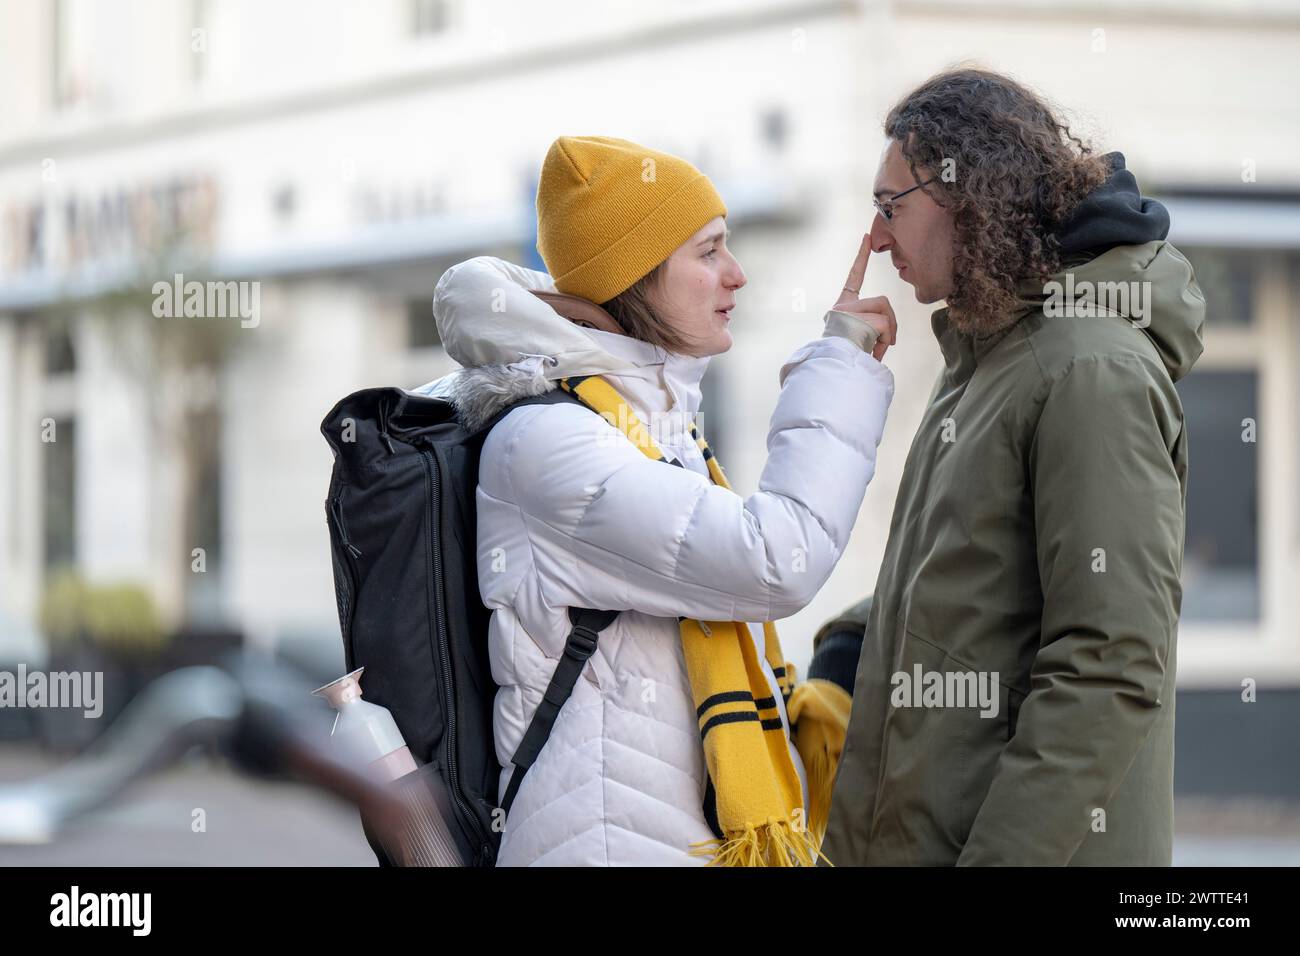 A candid moment of a person playfully touching another person's nose on an urban street. Stock Photo